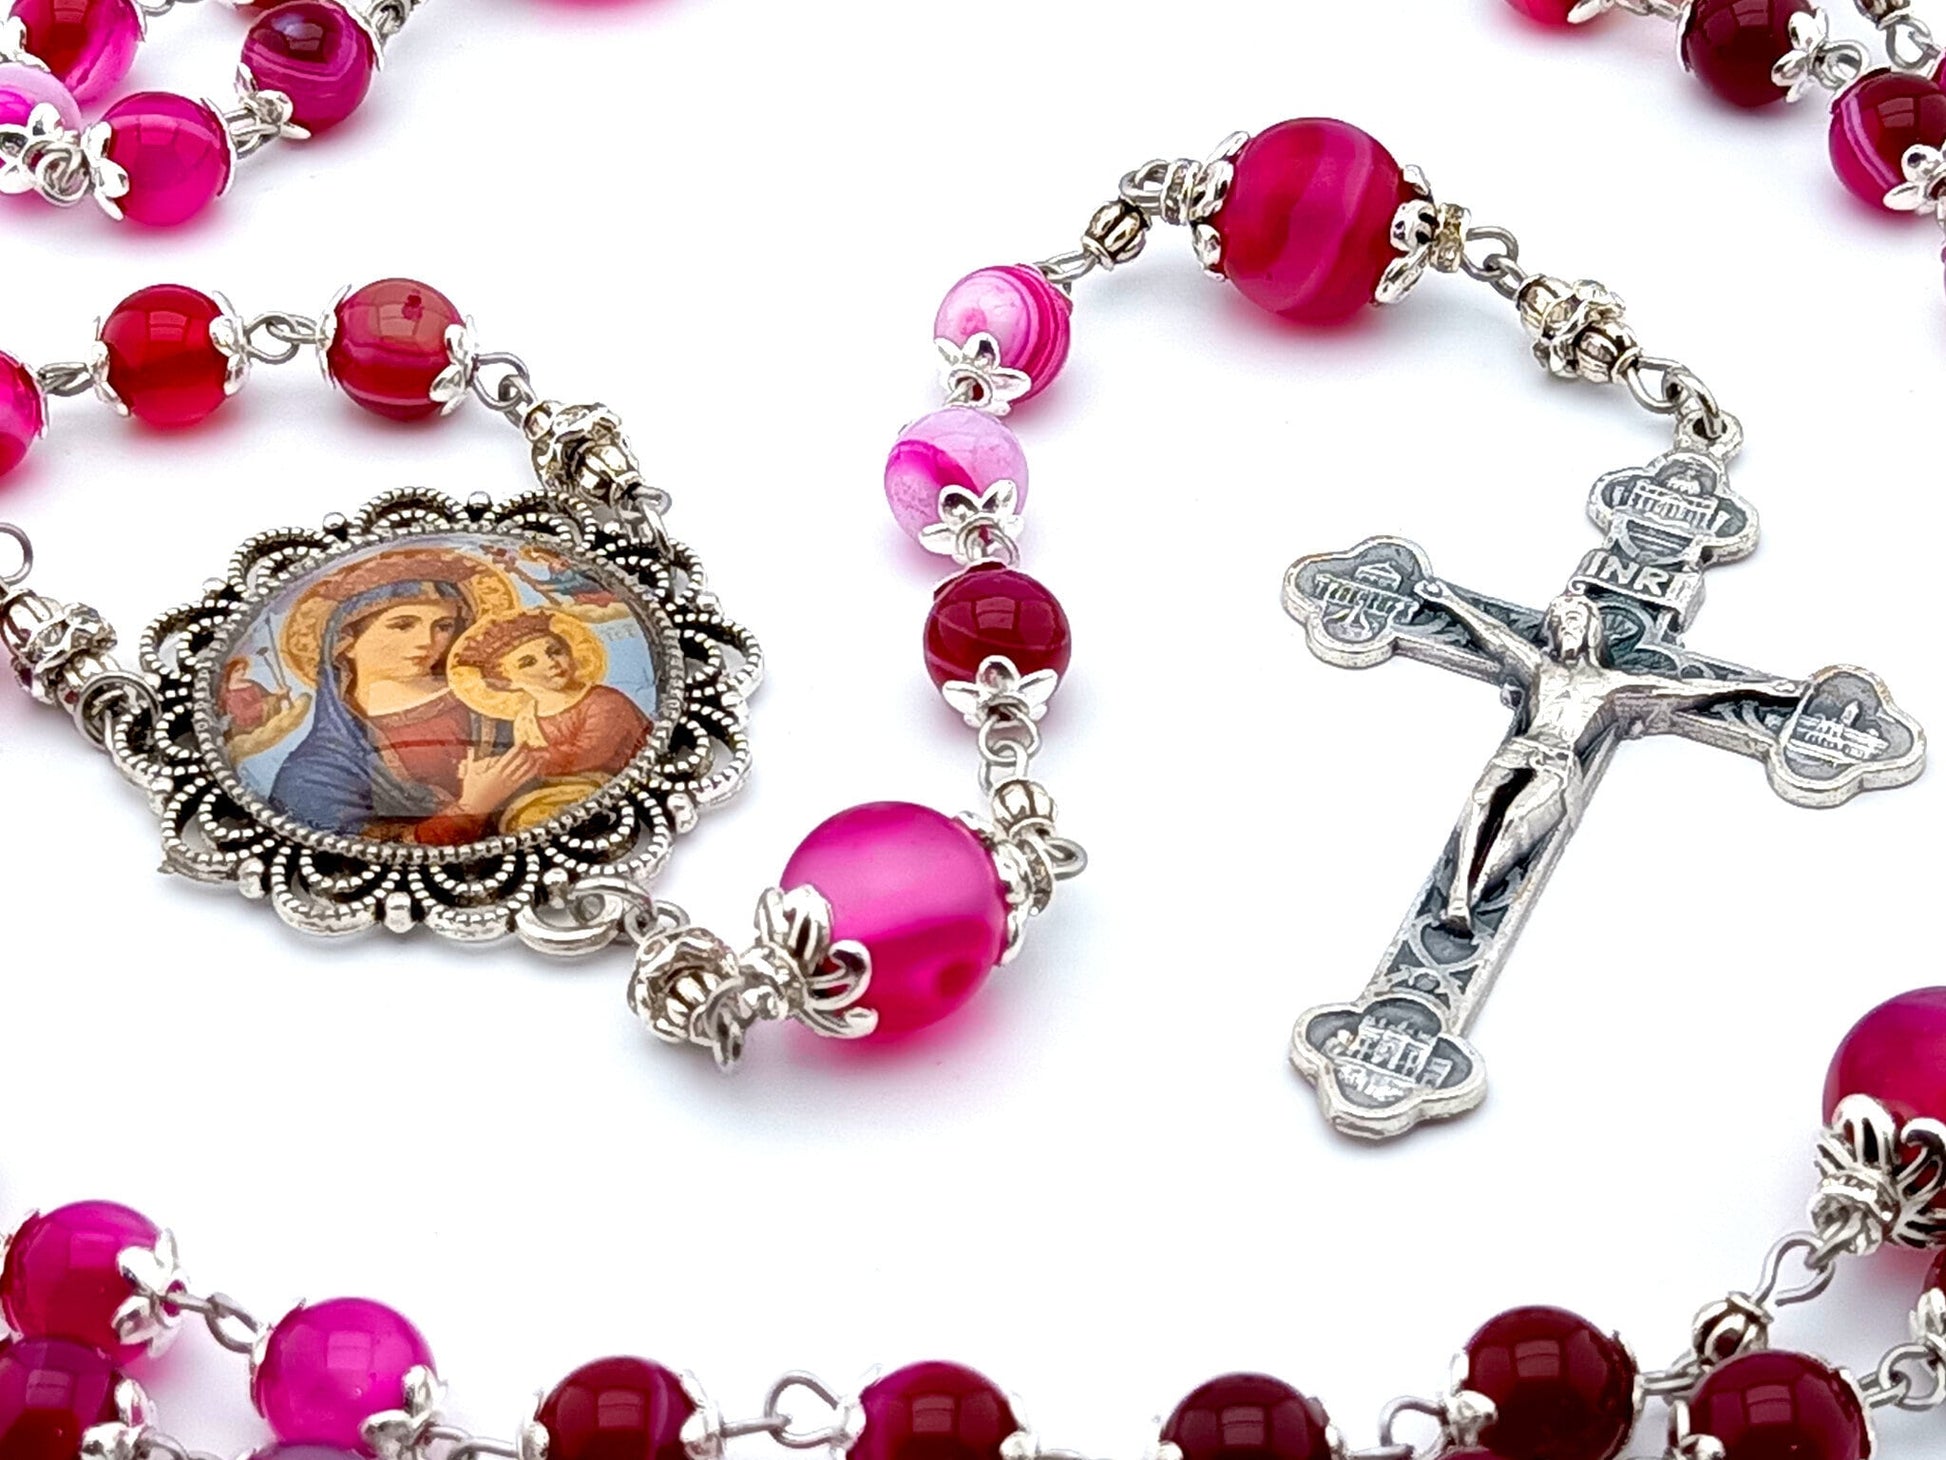 Our Lady of Perpetual Succour unique rosary beads with pink agate gemstone beads, silver crucifix, picture centre medal and accessories.